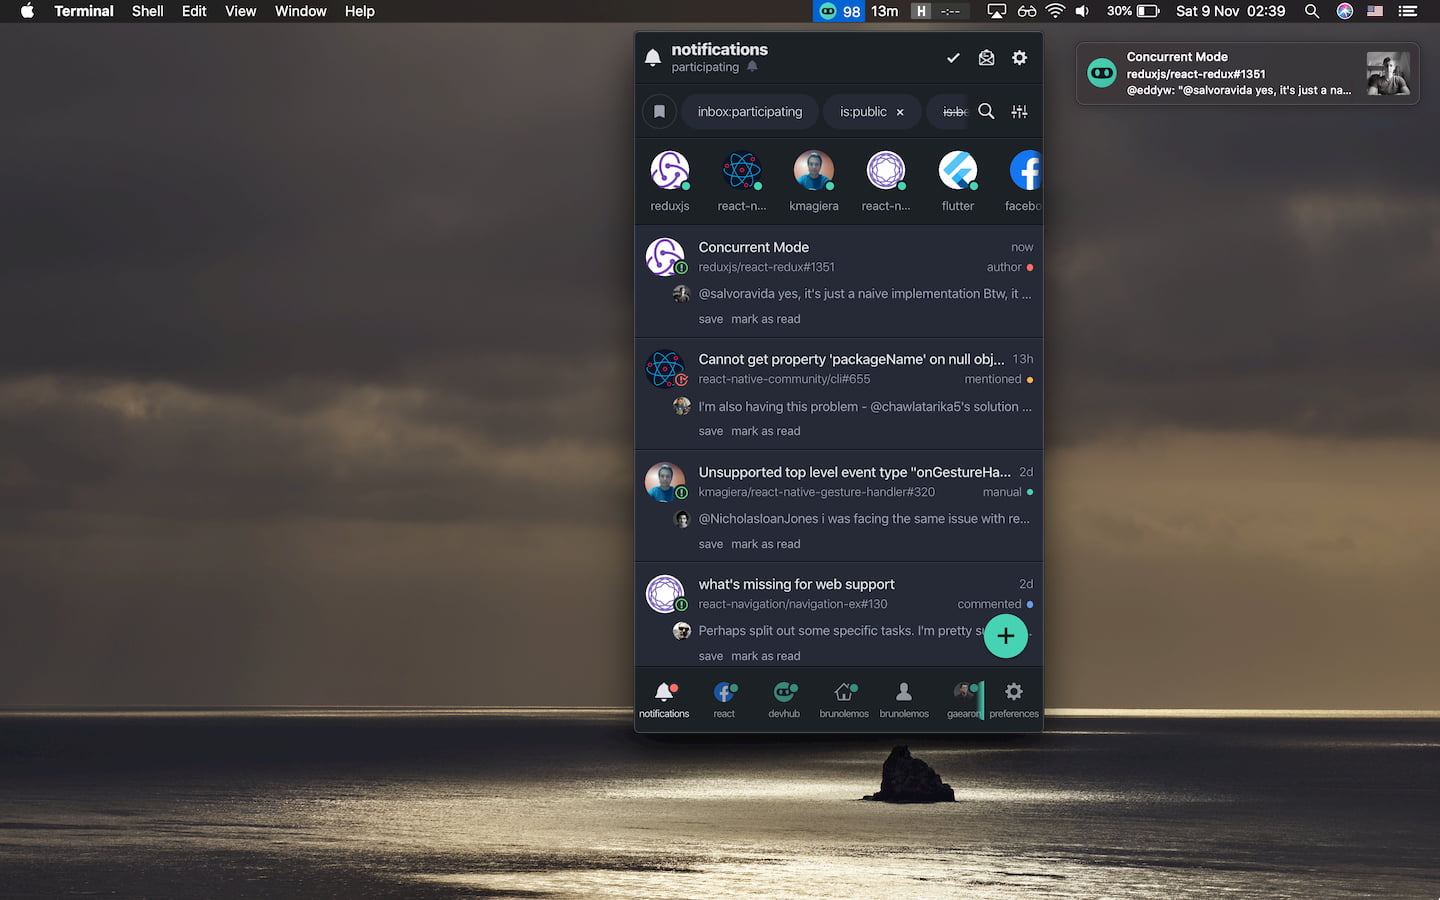 DevHub - Desktop app with Menubar mode, and a Push Notification at the top right